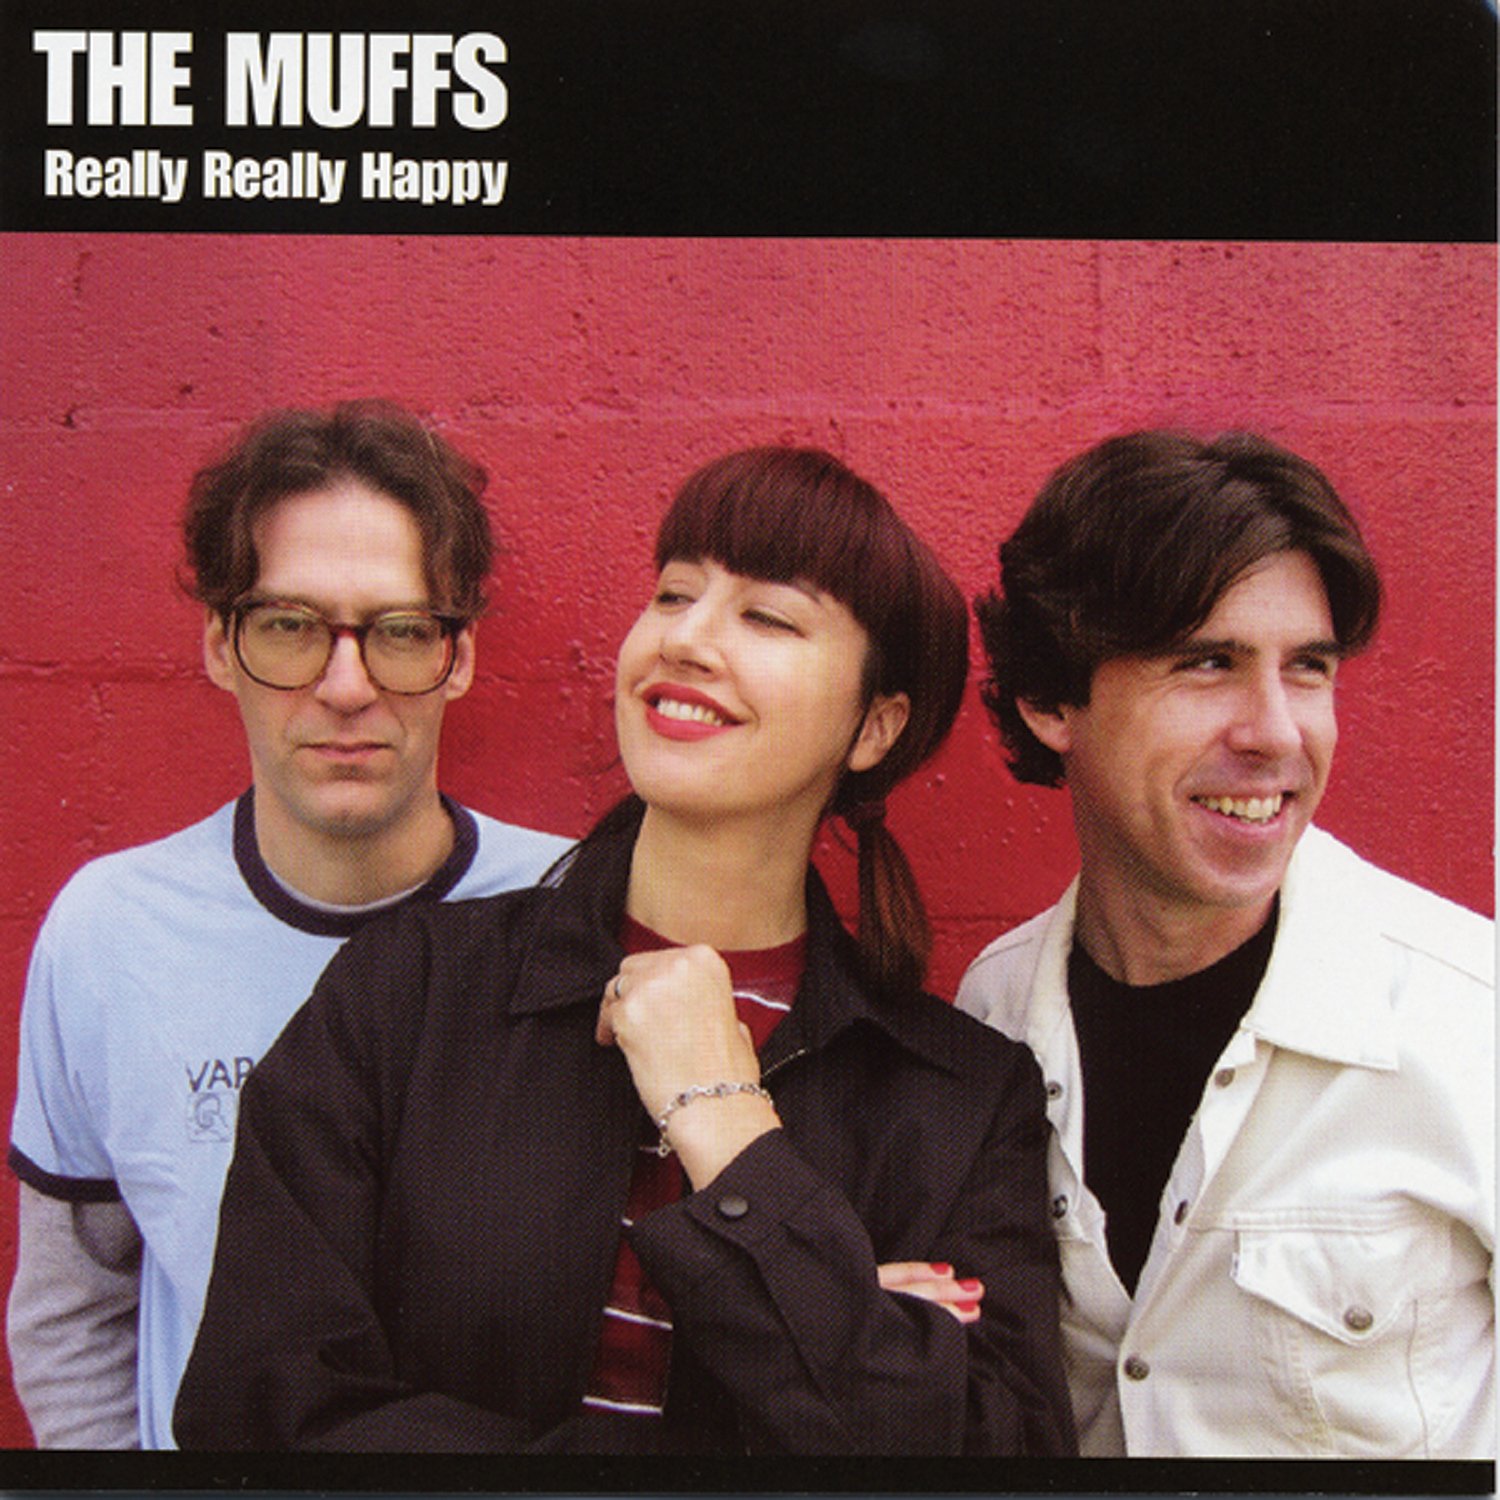 The Muffs-Really Really Happy-REISSUE-CD-FLAC-2004-401 Download